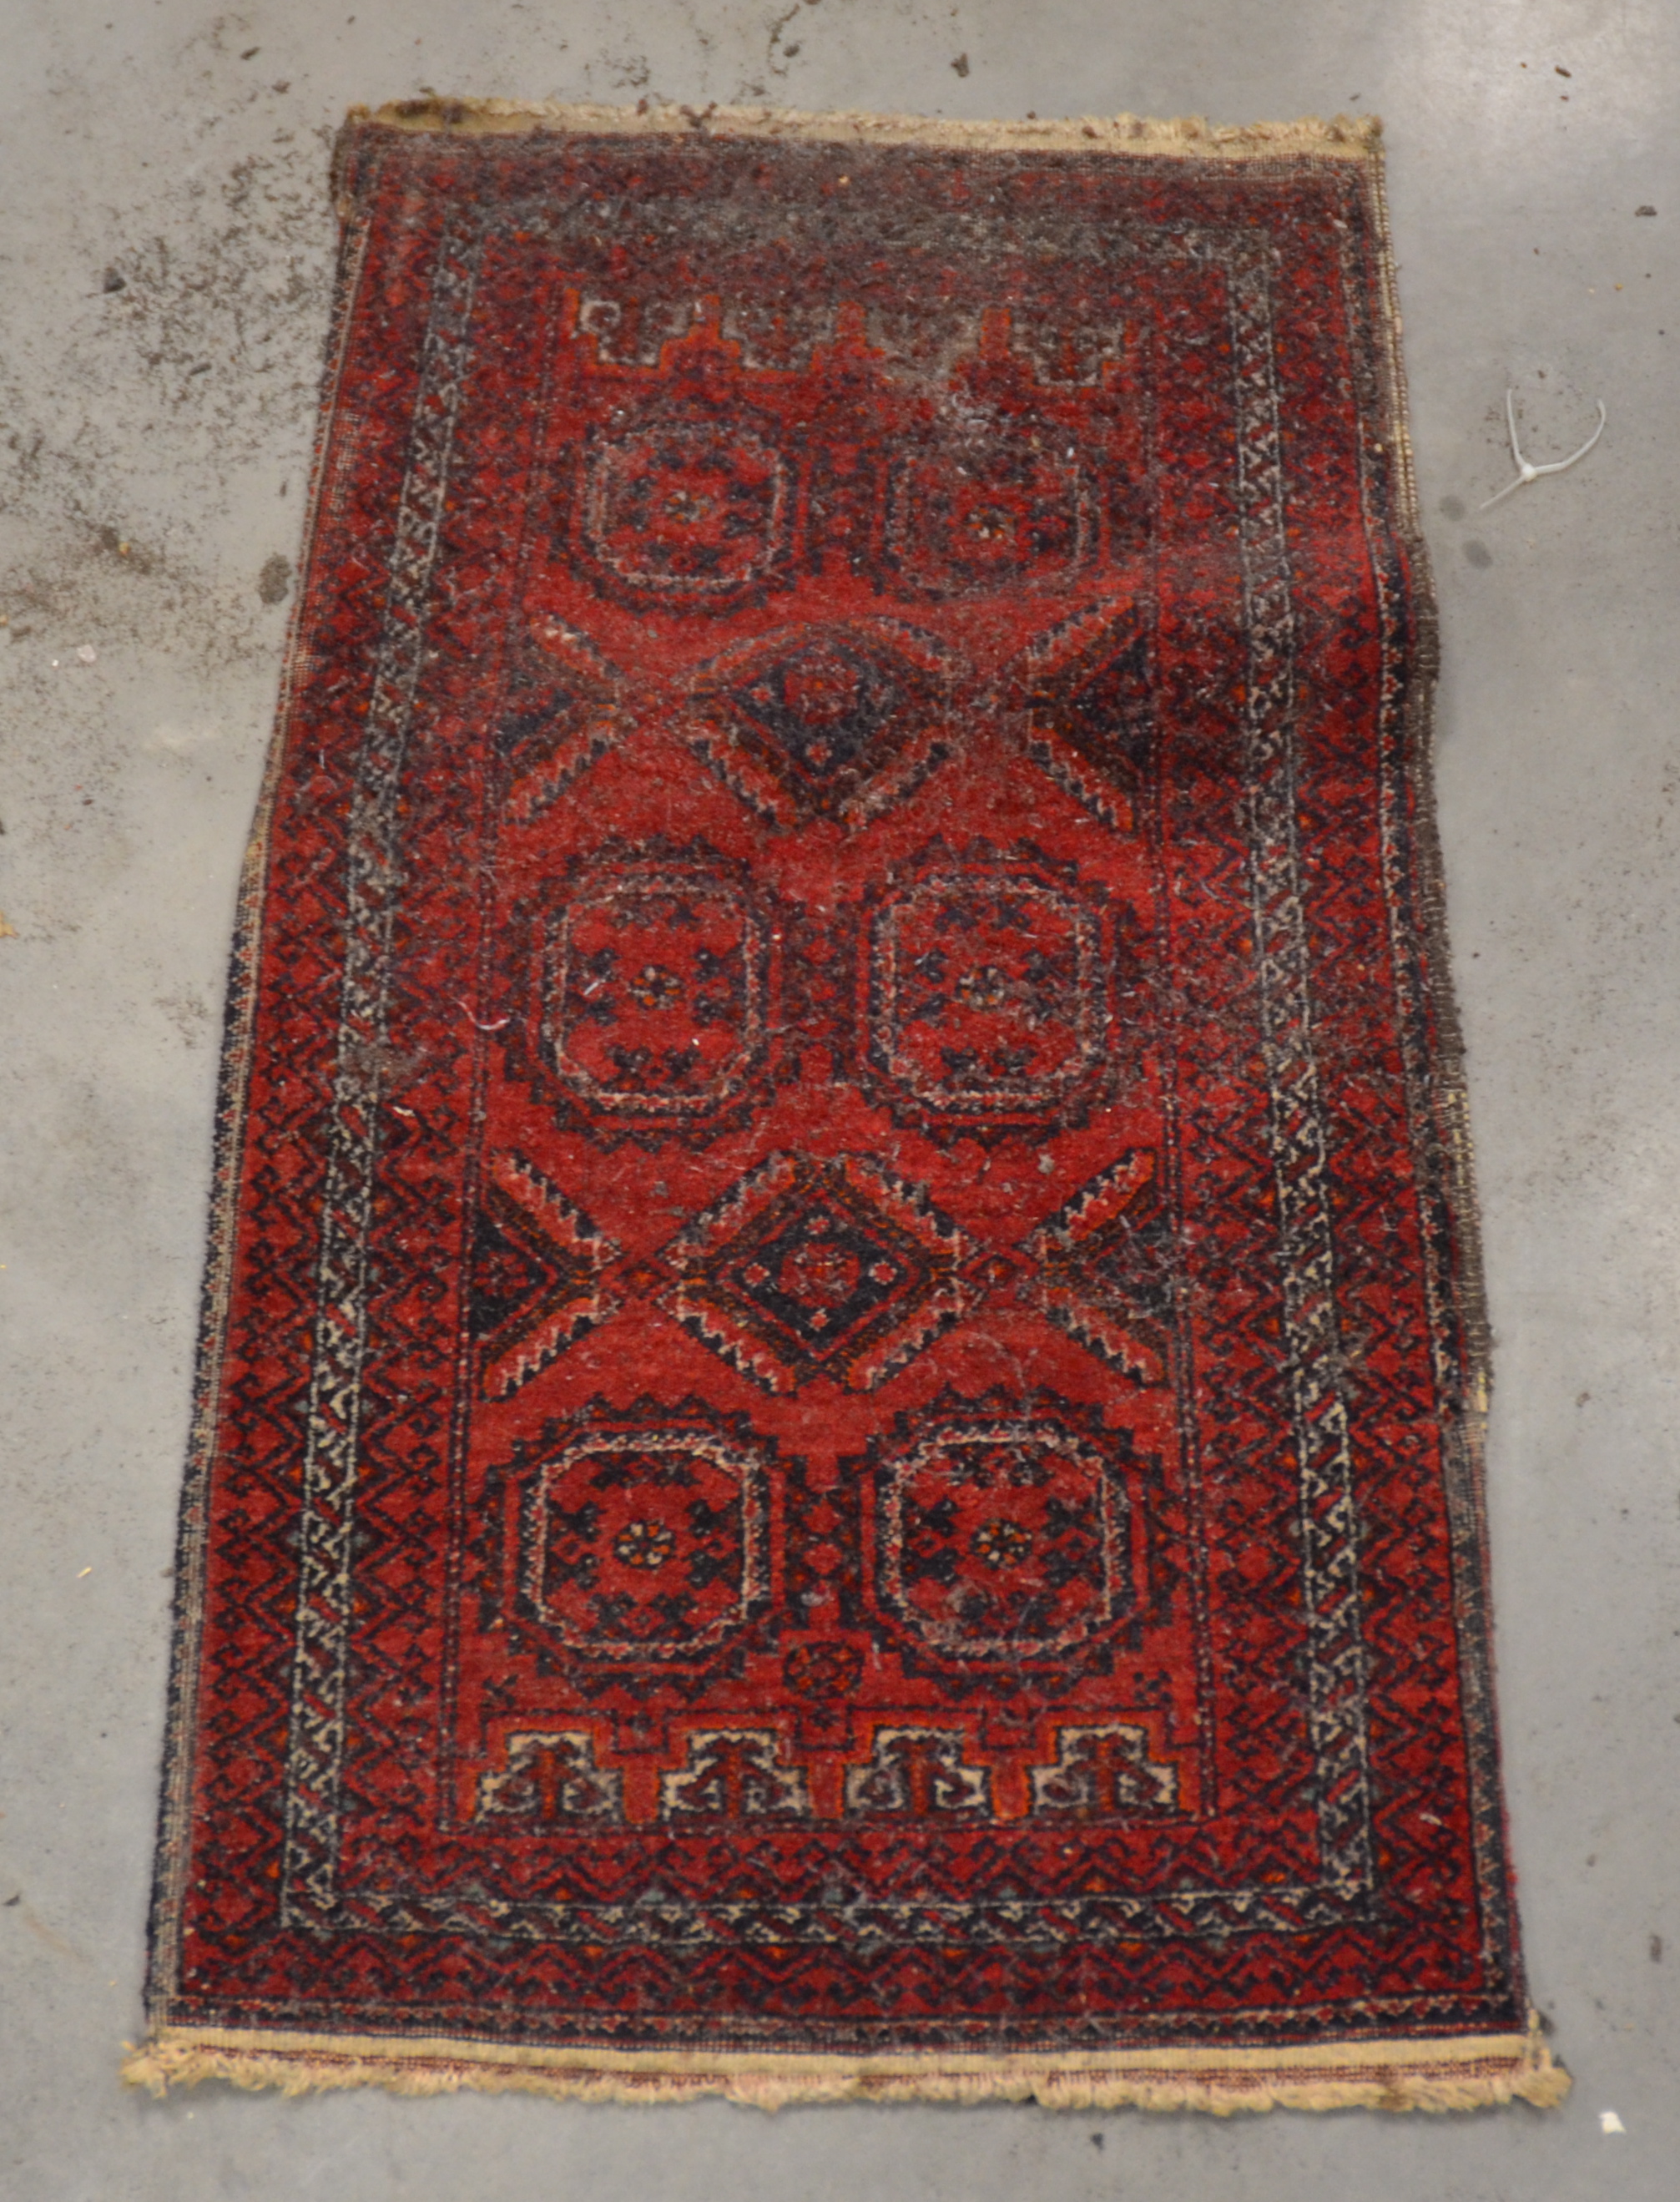 A Middle Eastern rug of near square proportions, with central octofoil shape, surrounded by a - Image 3 of 6